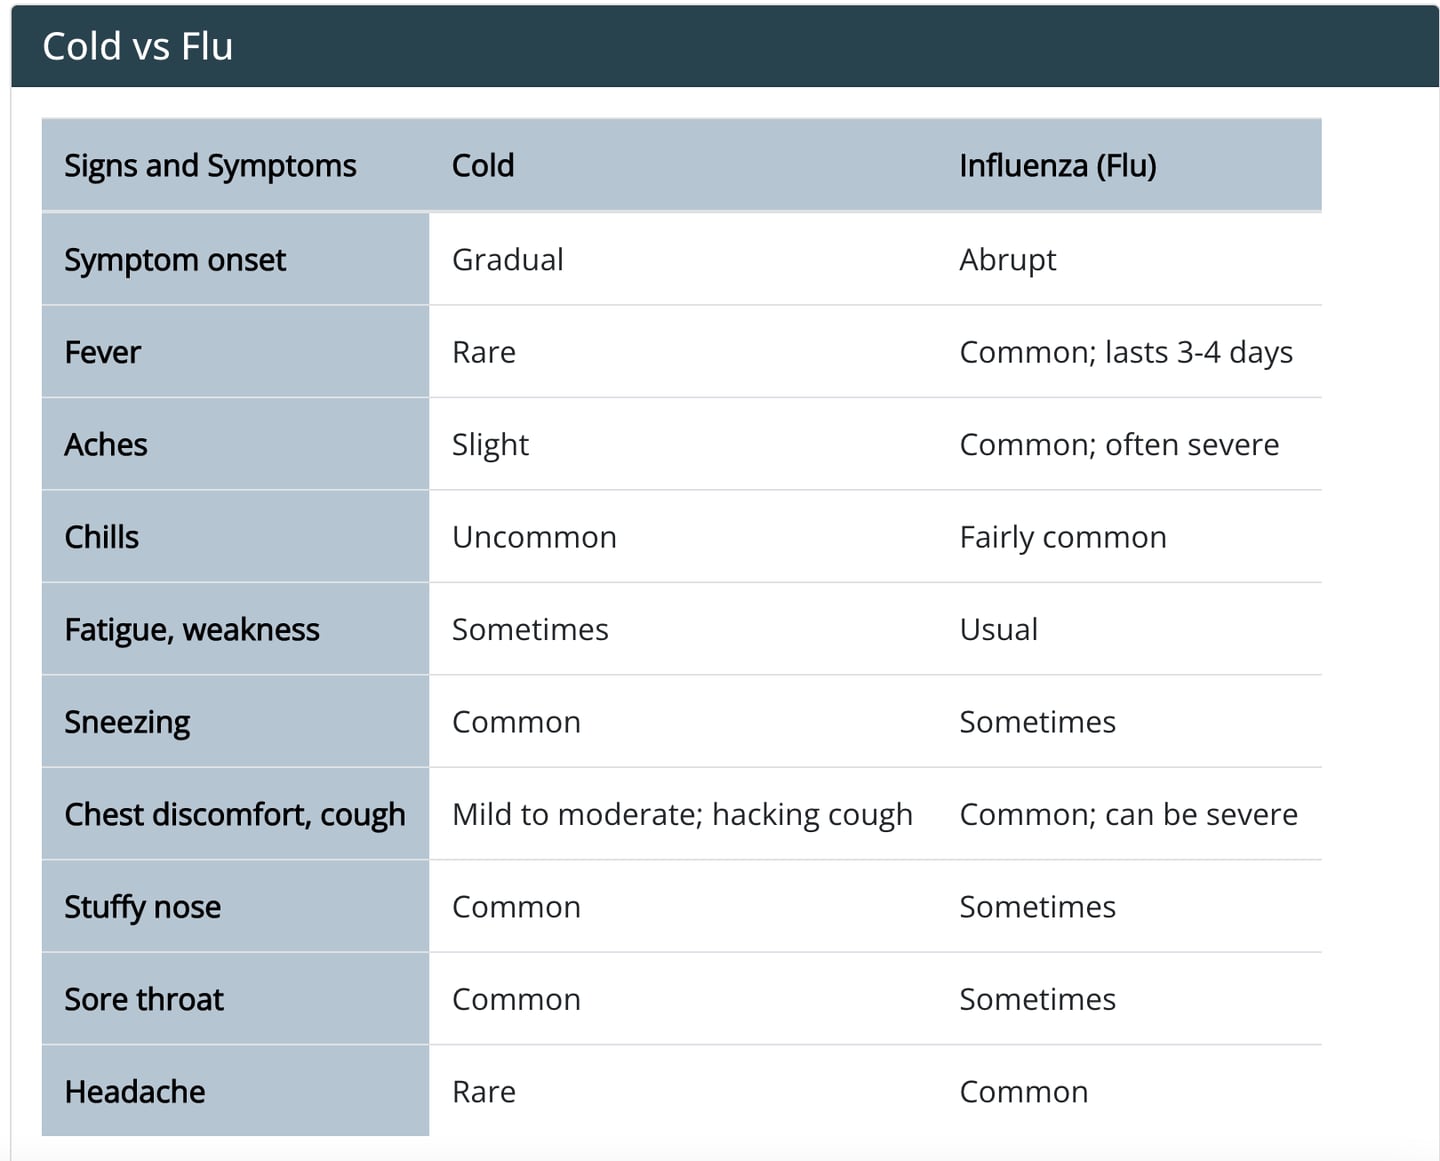 Symptoms for flu and COVID-19 can be very similar, according to the CDC. Northwestern Medicine emergency department doctor Jeremy Silver recommends testing to determine what you may have. Here are ways to help you distinguish symptoms, according to the US Centers for Disease Control and Prevention.